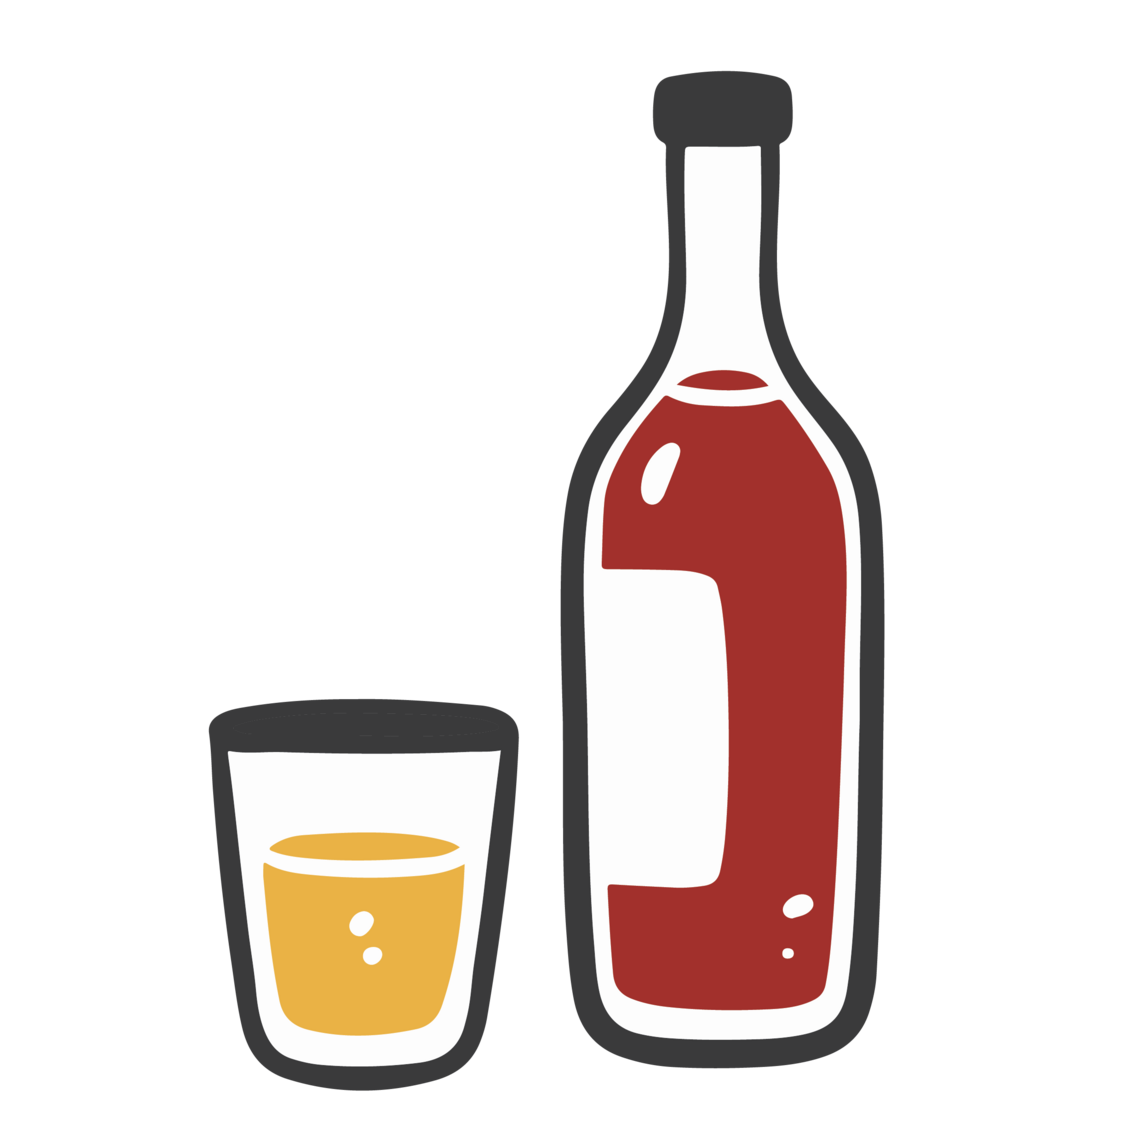 wine and glass icon